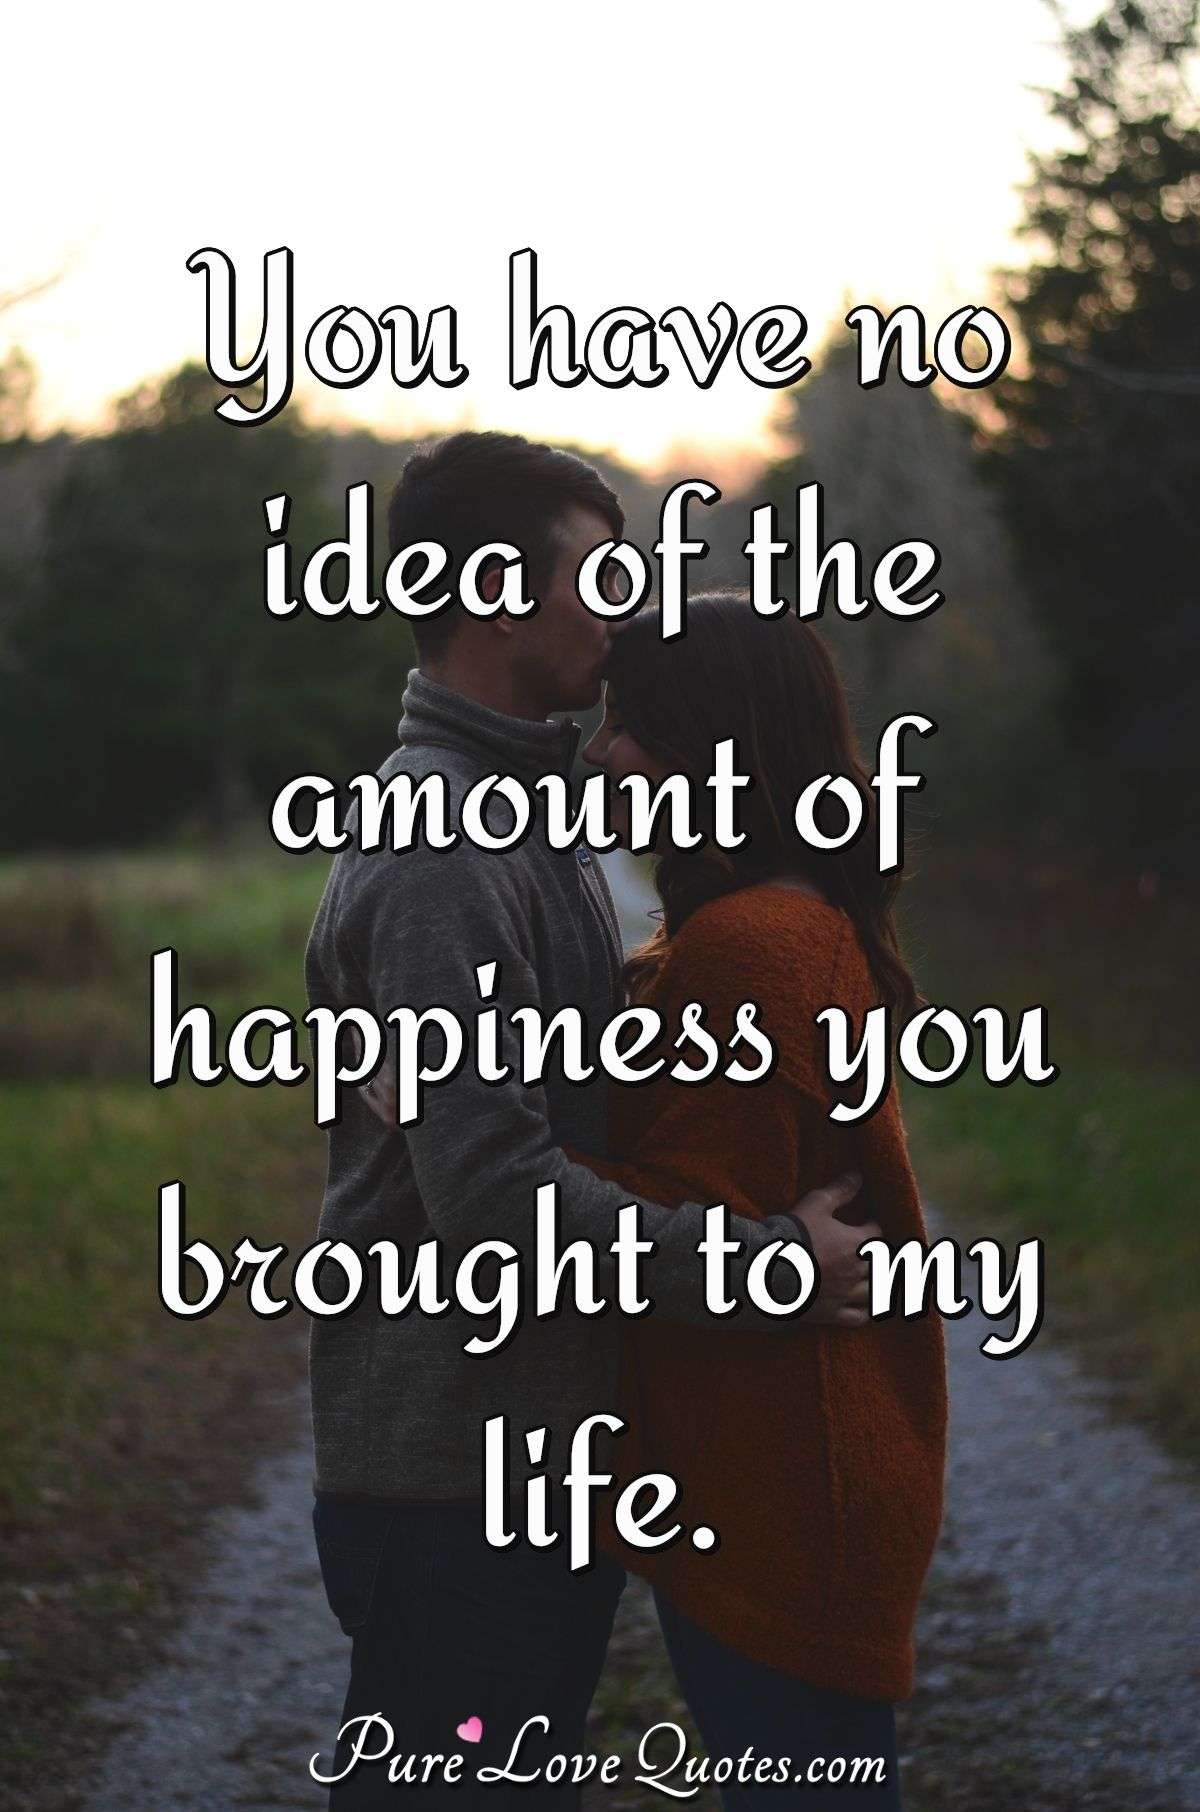 You have no idea of the amount of happiness you brought to my life. - Anonymous